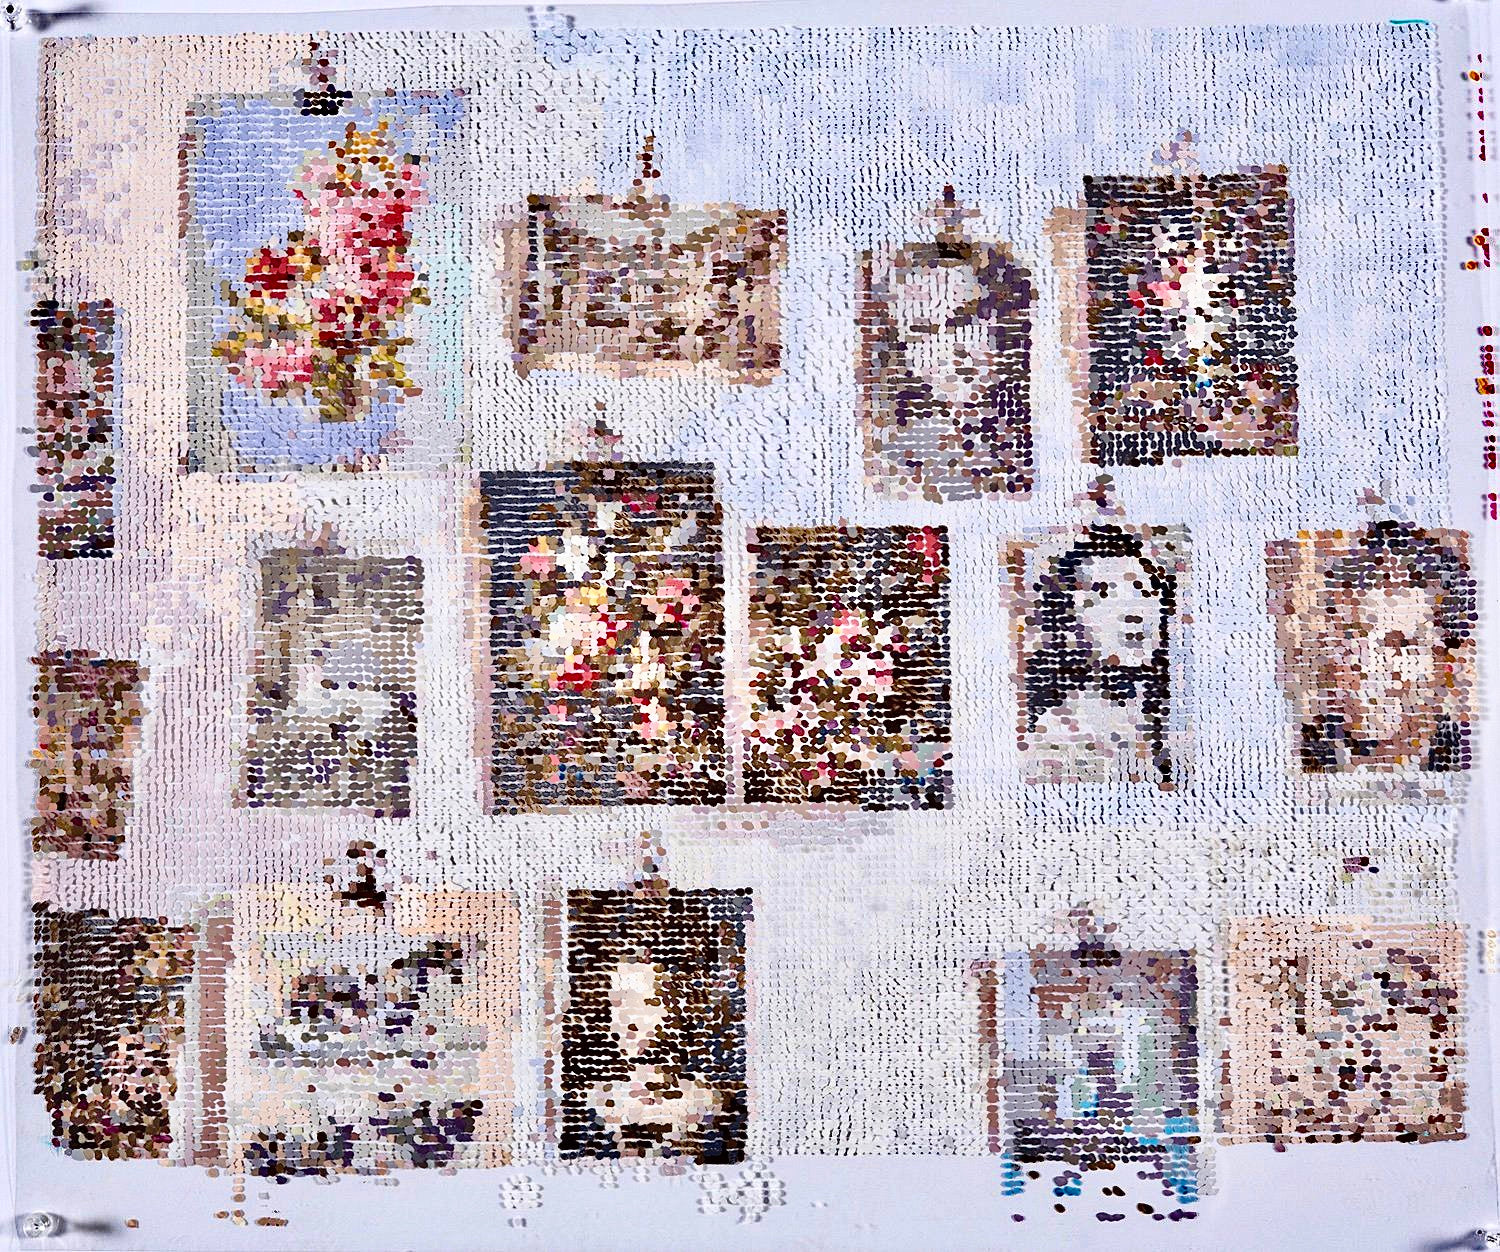 Kirstin Lamb, "After Studio Wall with Clips"